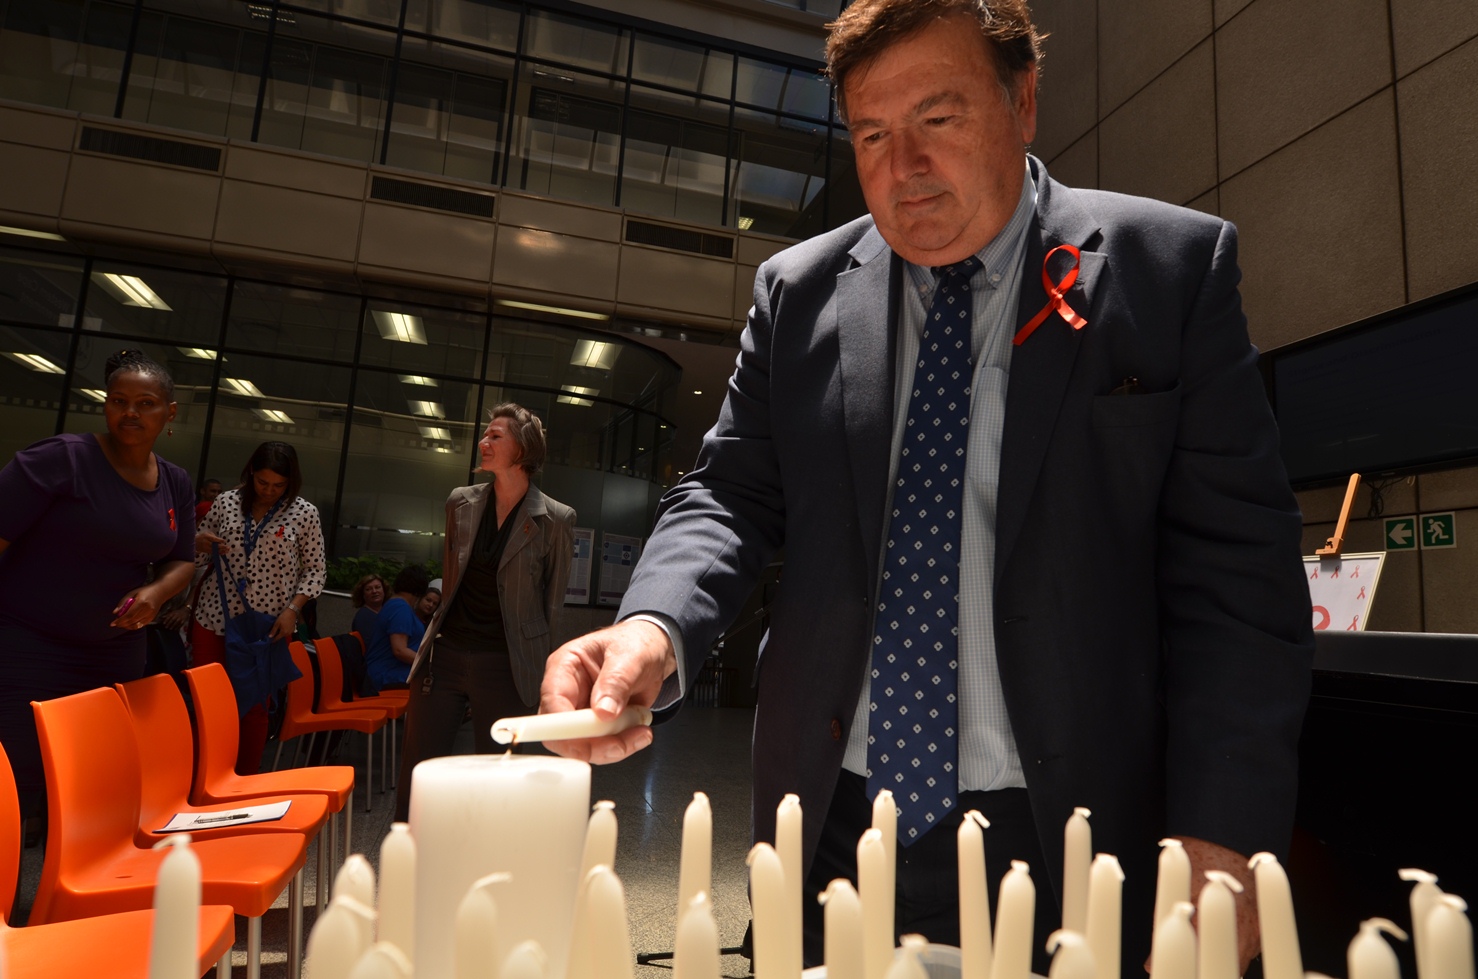 Minister Grant lights a candle to commemorate World AIDS Day on 1 December 2014.